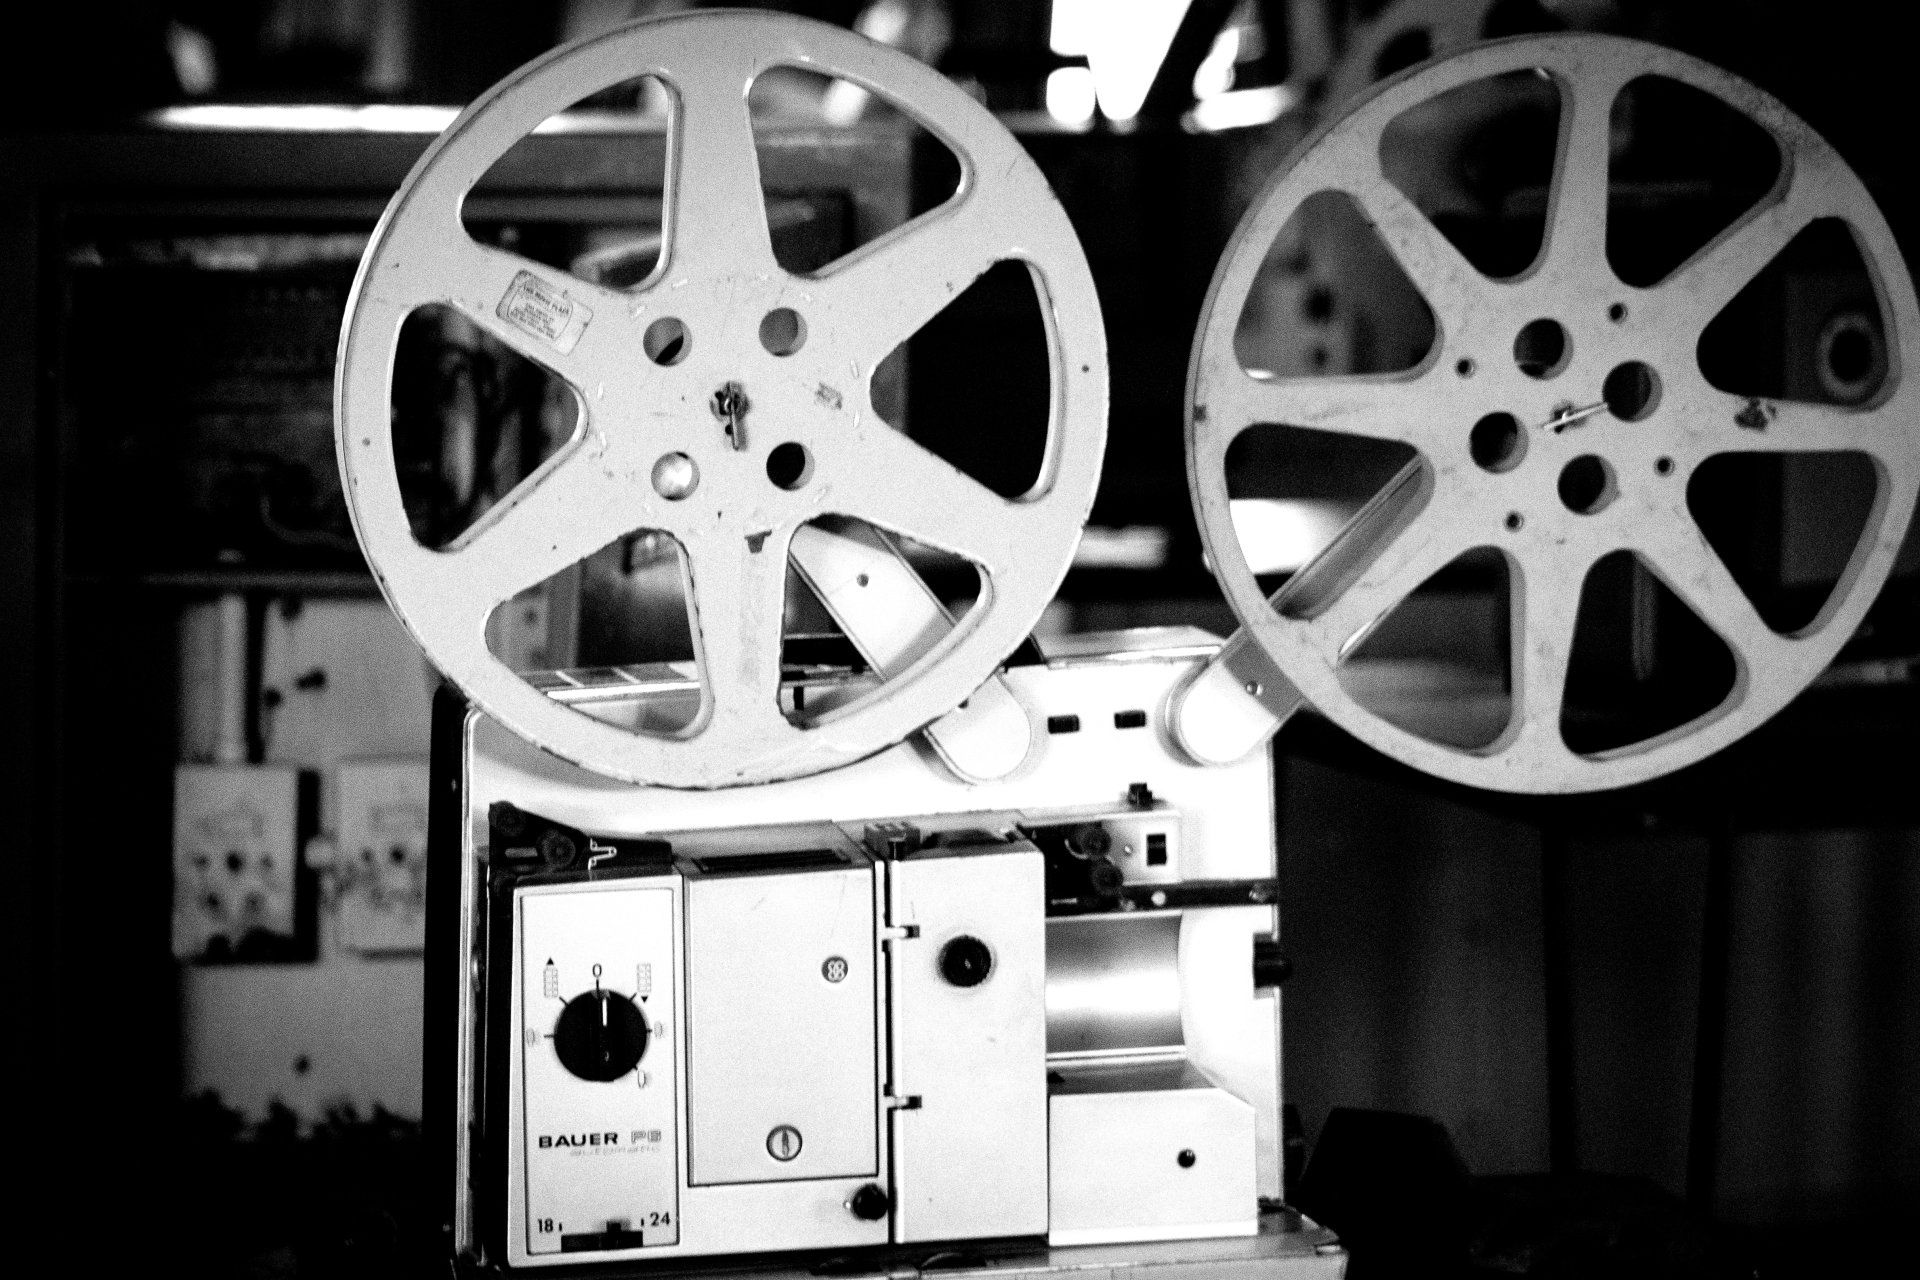 a black and white photo of a bauer ps movie projector